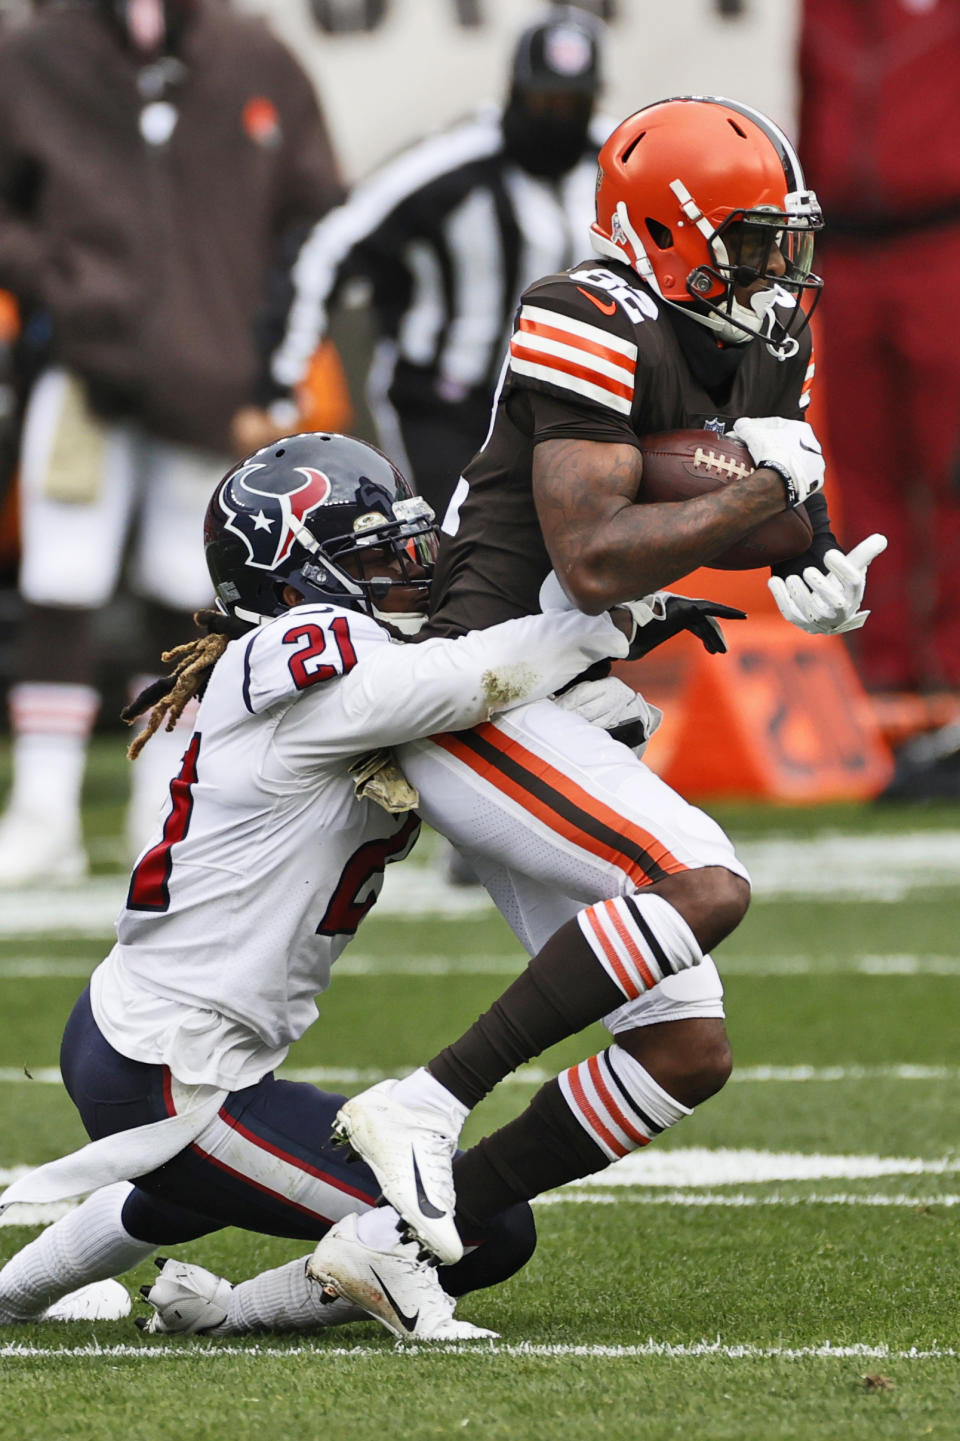 Cleveland Browns wide receiver Rashard Higgins (82) is tackled by Houston Texans cornerback Bradley Roby (21) during the first half of an NFL football game, Sunday, Nov. 15, 2020, in Cleveland. (AP Photo/Ron Schwane)